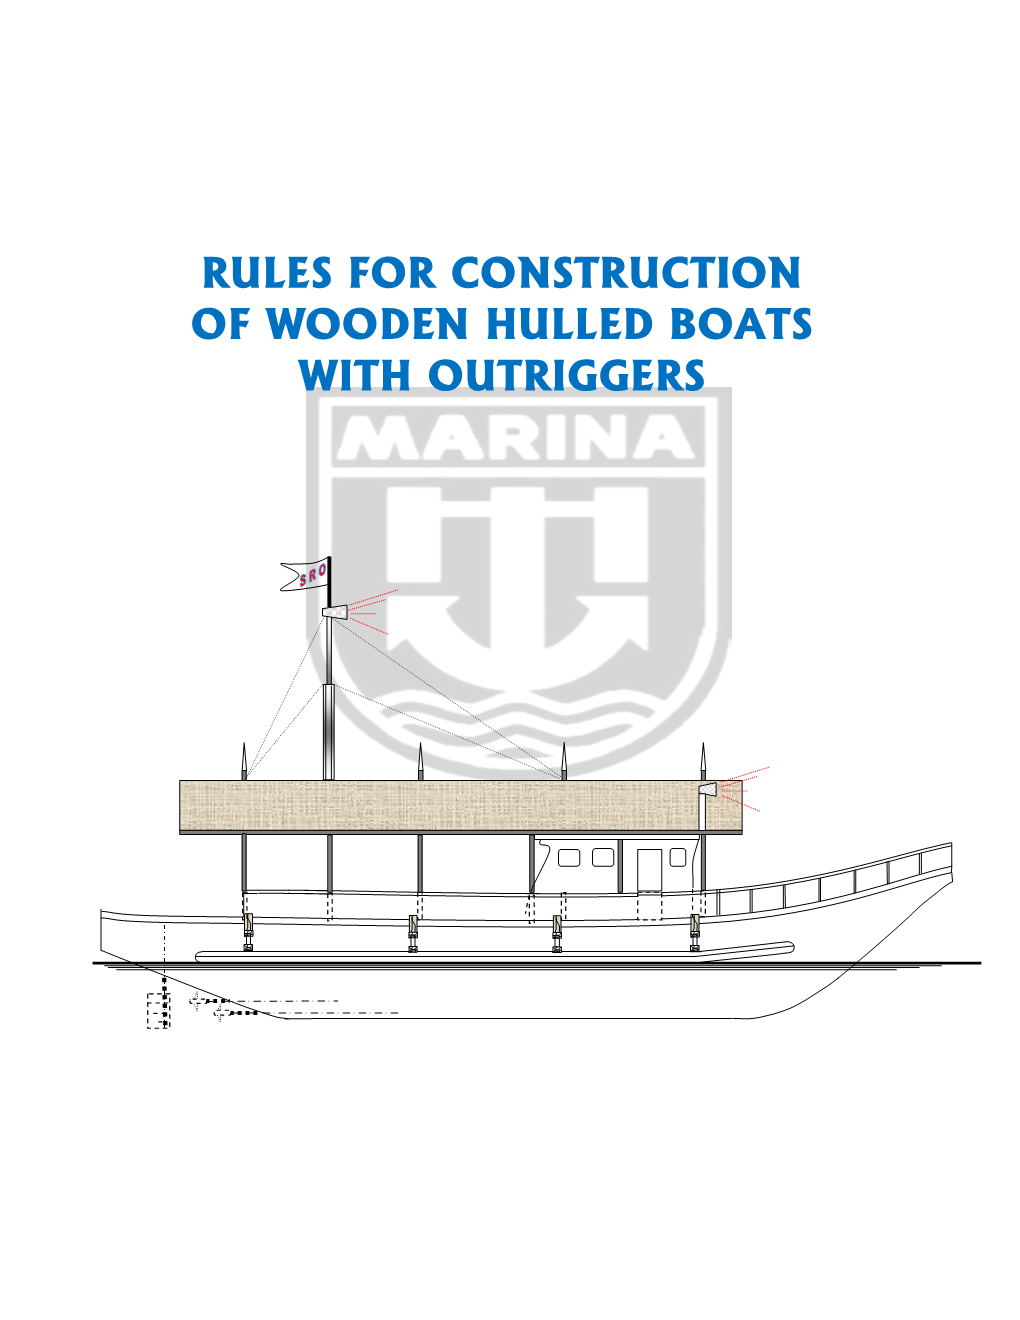 Rules for Construction of Wooden Hulled Boats With